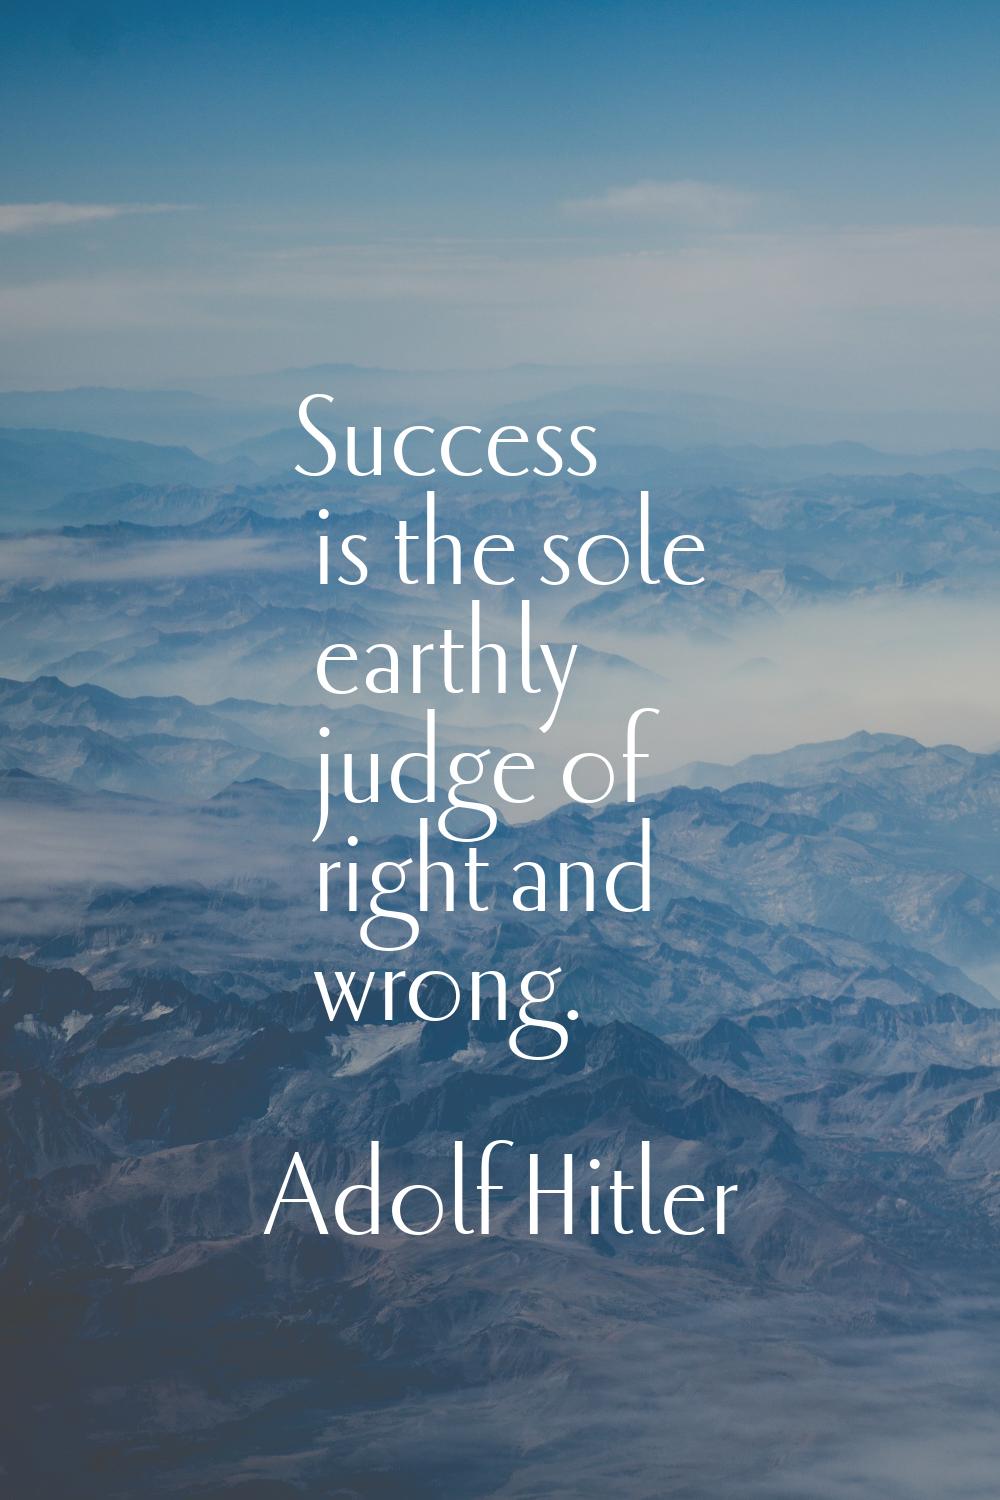 Success is the sole earthly judge of right and wrong.